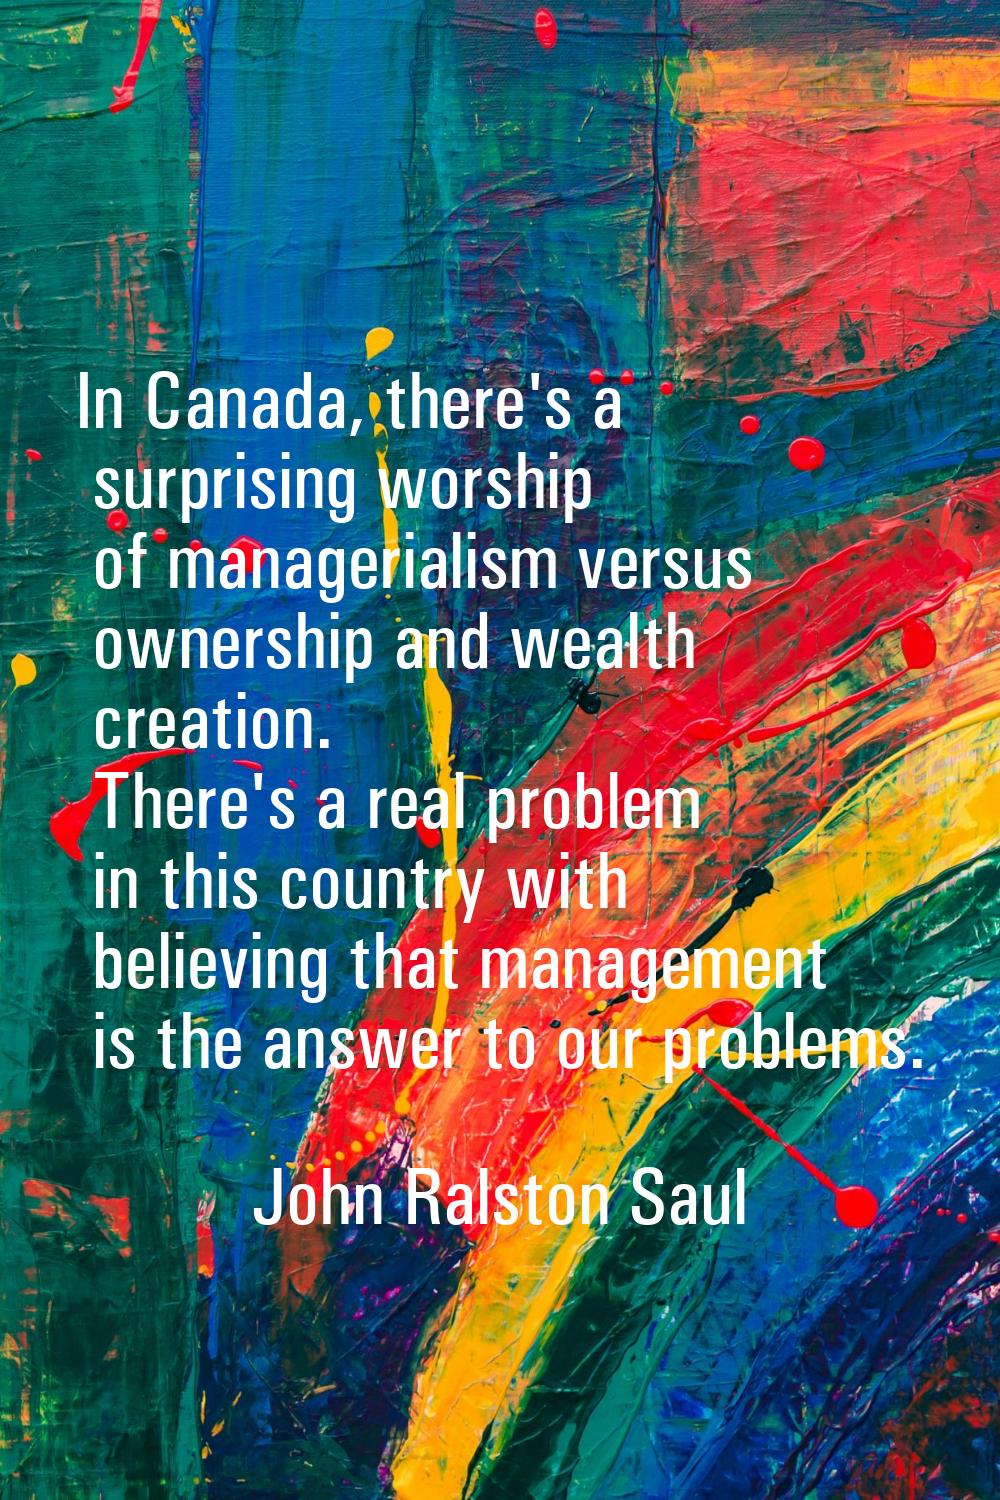 In Canada, there's a surprising worship of managerialism versus ownership and wealth creation. Ther